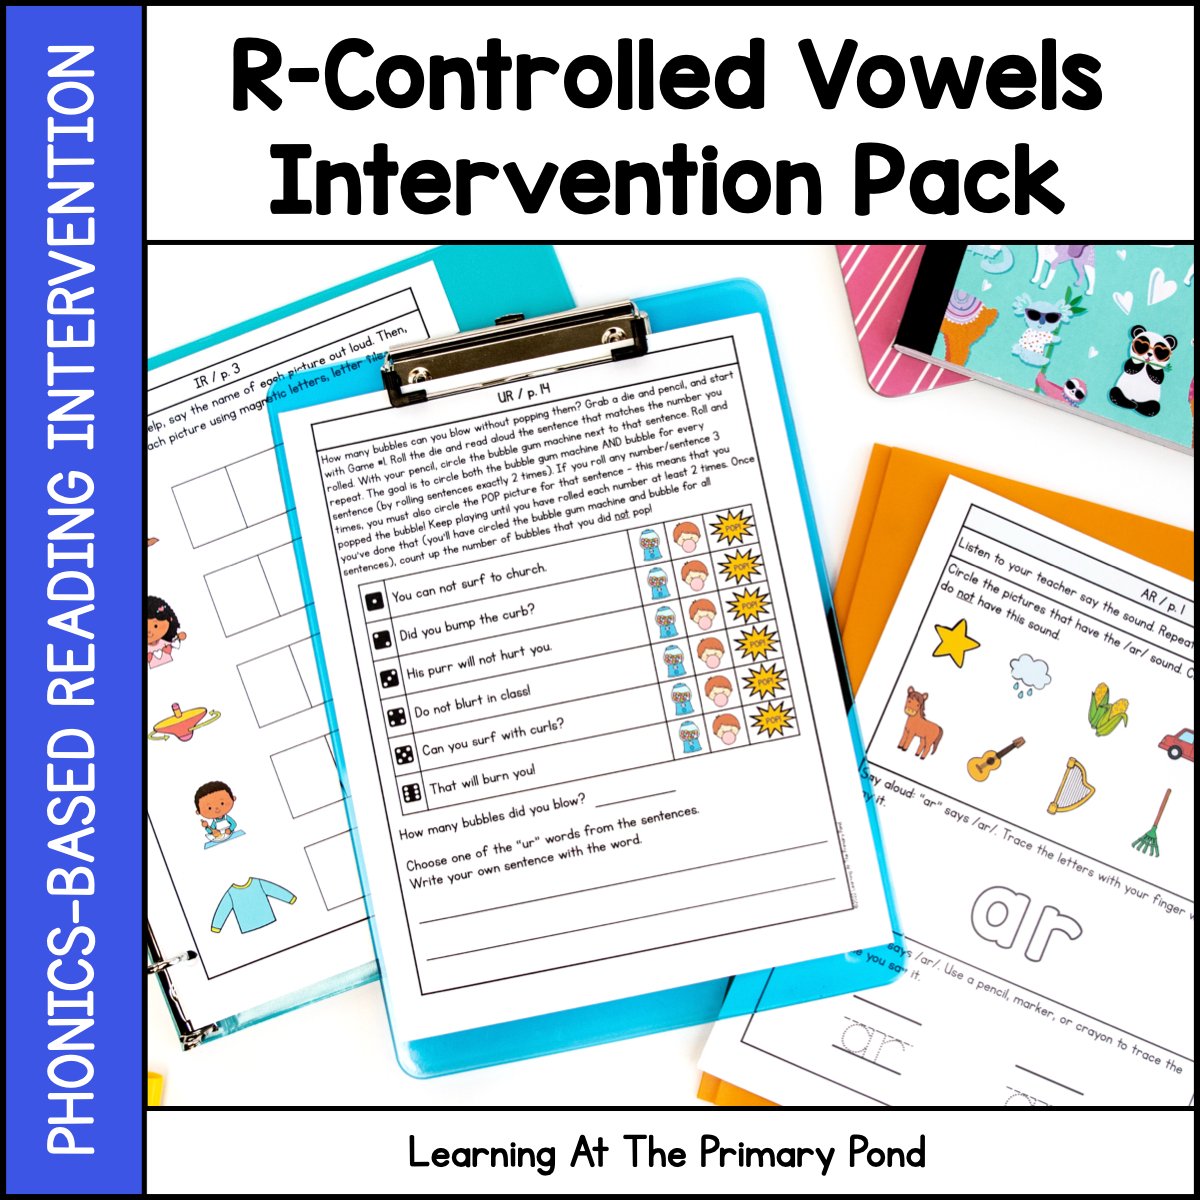 R-Controlled Vowels Intervention Pack | No-Prep, Phonics-Based Reading Intervention - learning-at-the-primary-pond